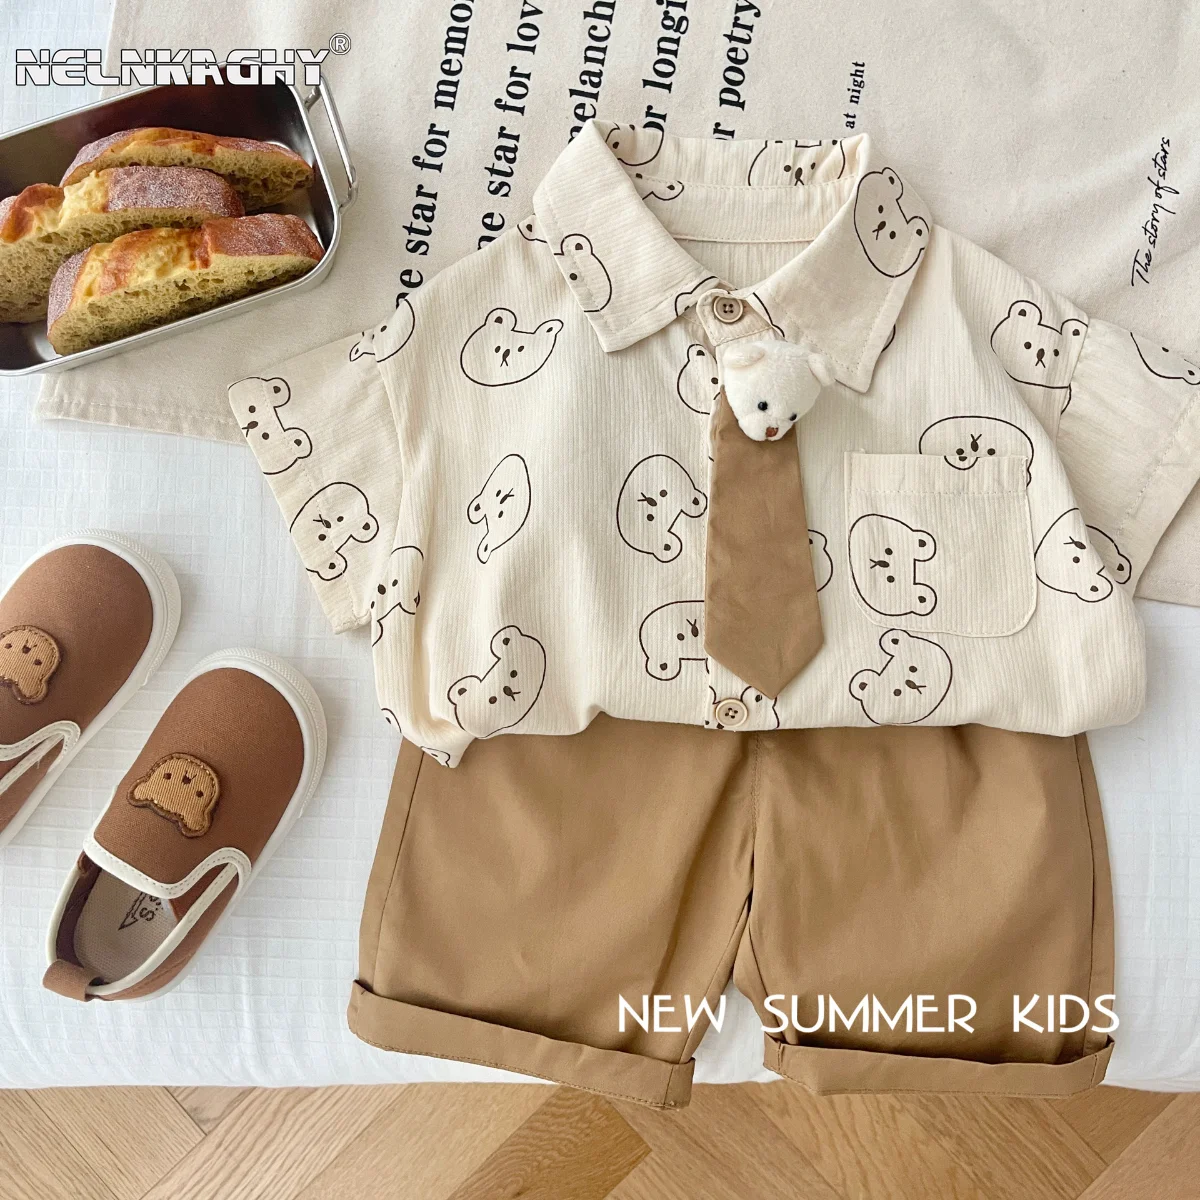 

New 2023 Summer Kids Baby Boys Cartoon Top with 3D Bear & Single-Breasted Tie + Solid Color Shorts Set 98% Cotton 2pcs 3M-6Y